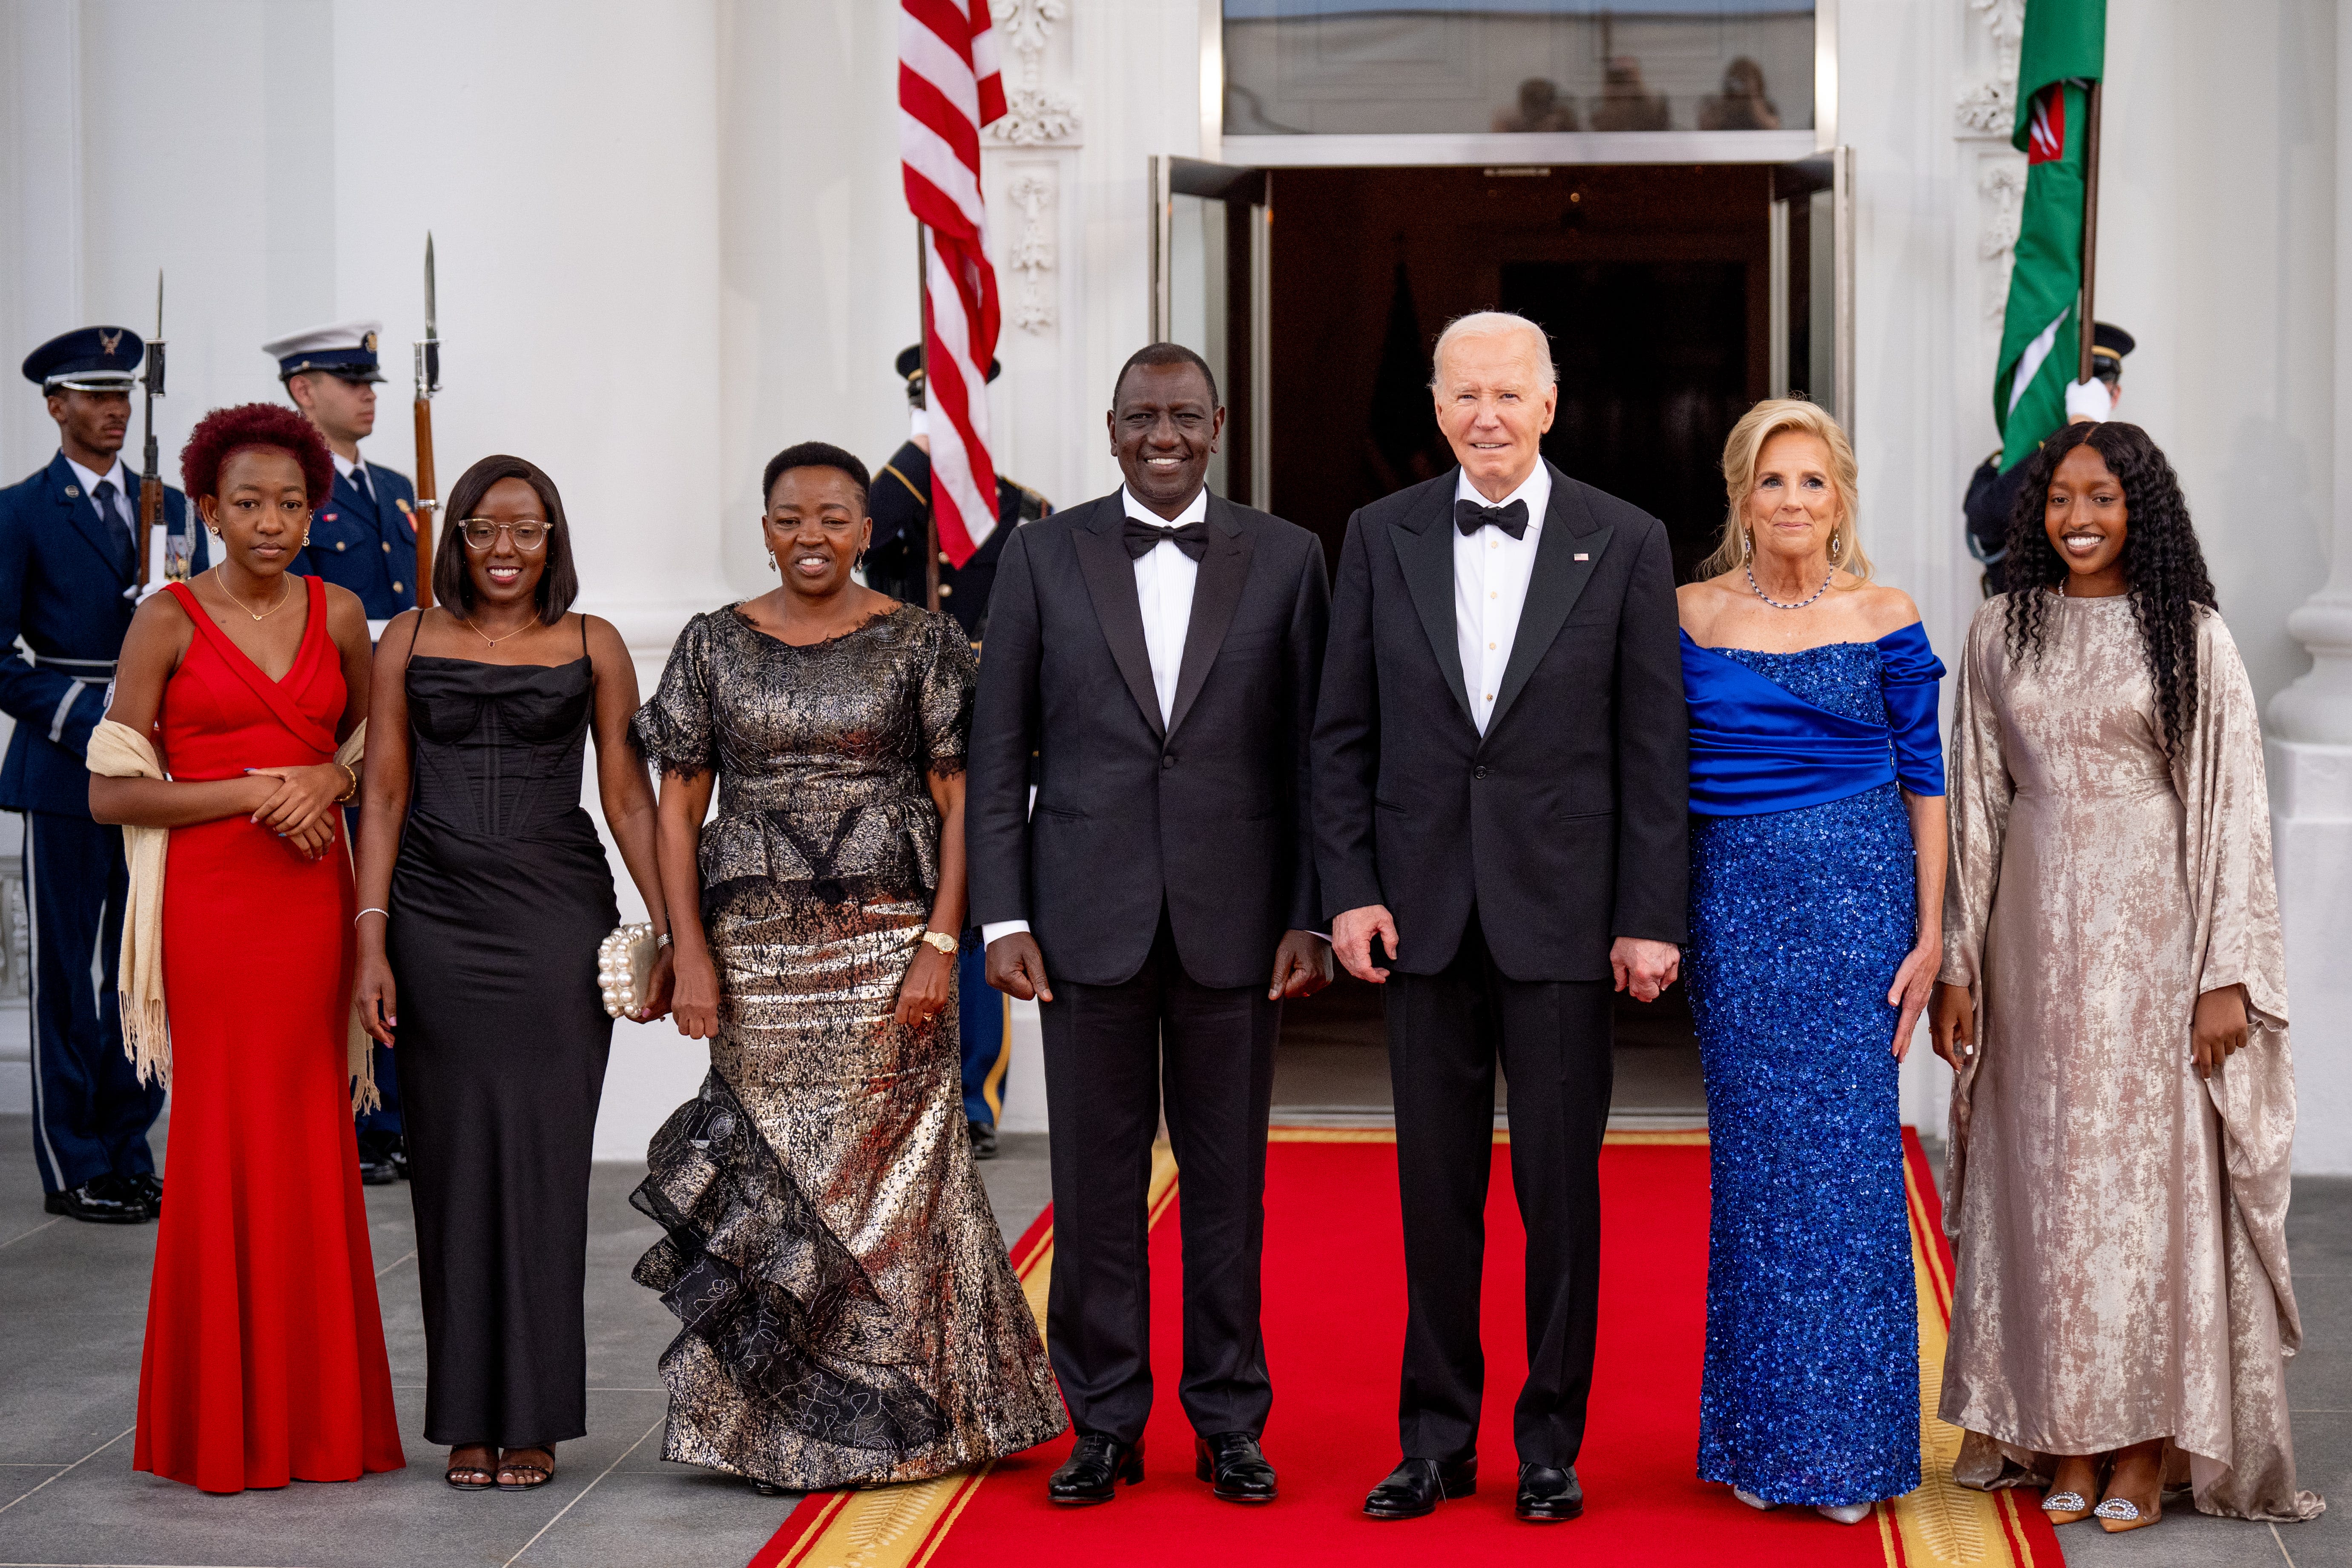 Roses. Butter-poached lobster. Obama cameo. Takeaways from the White House state dinner